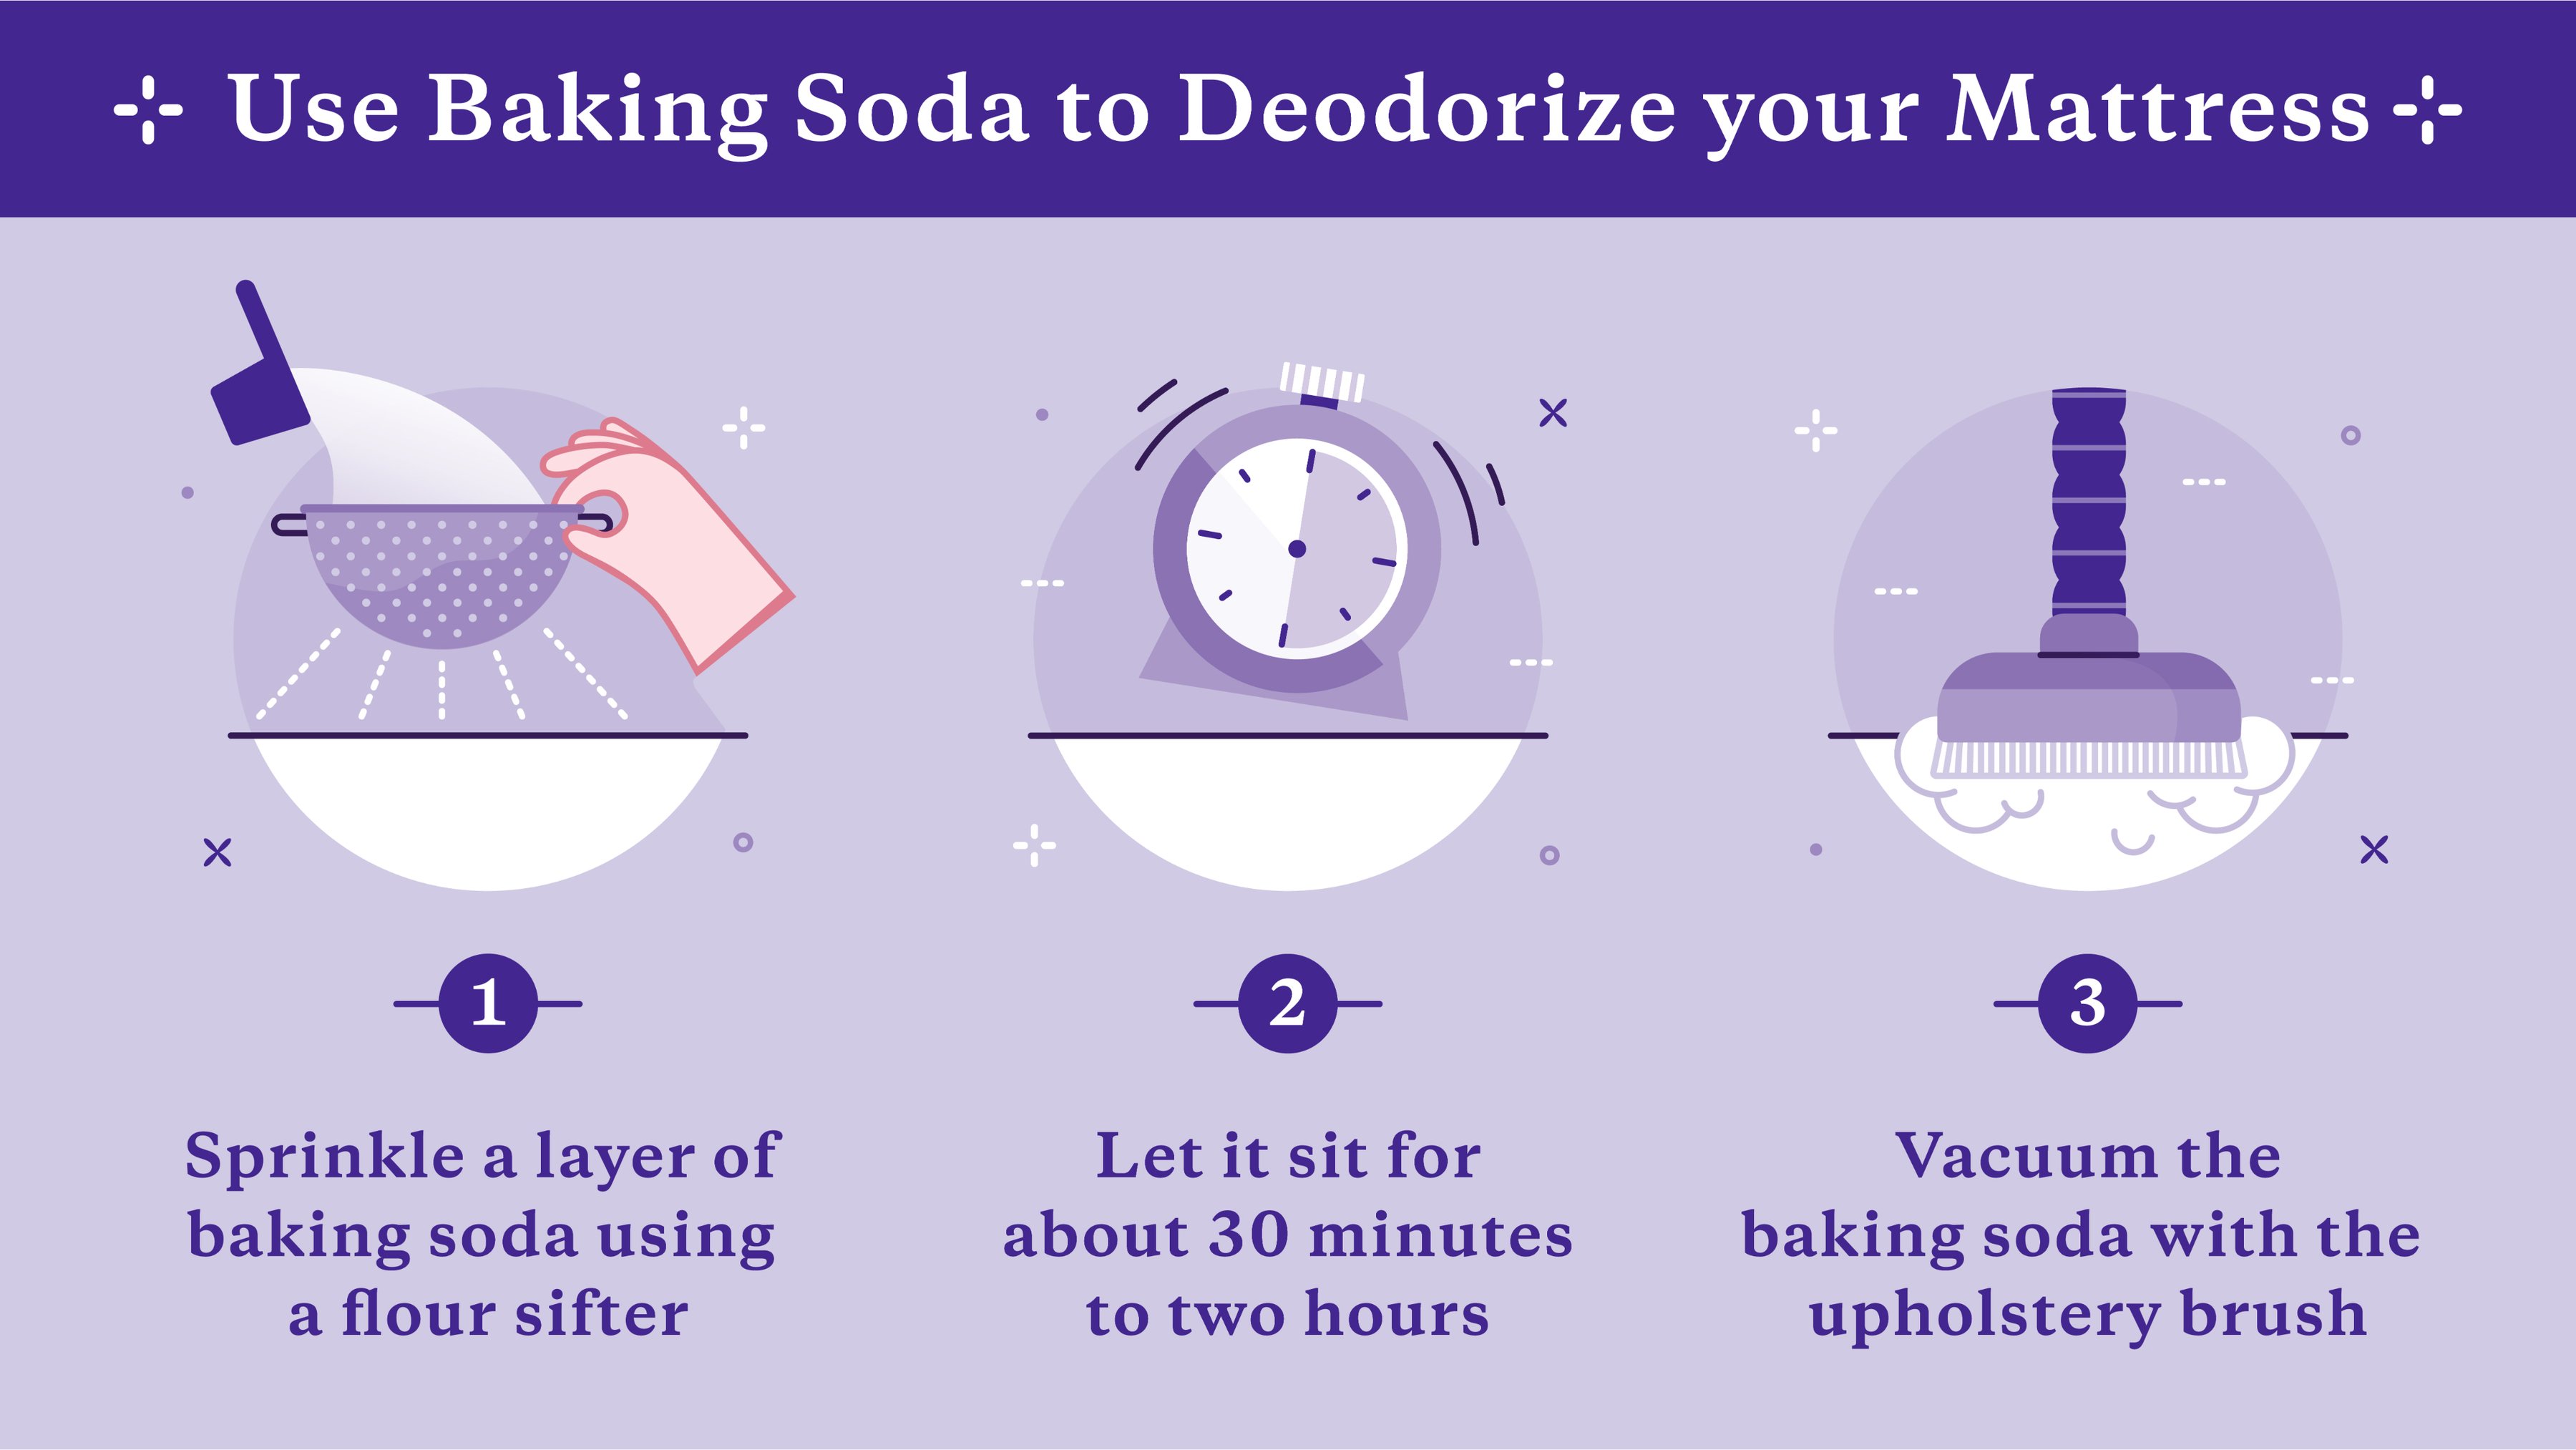 steps to deodorize mattress with baking soda